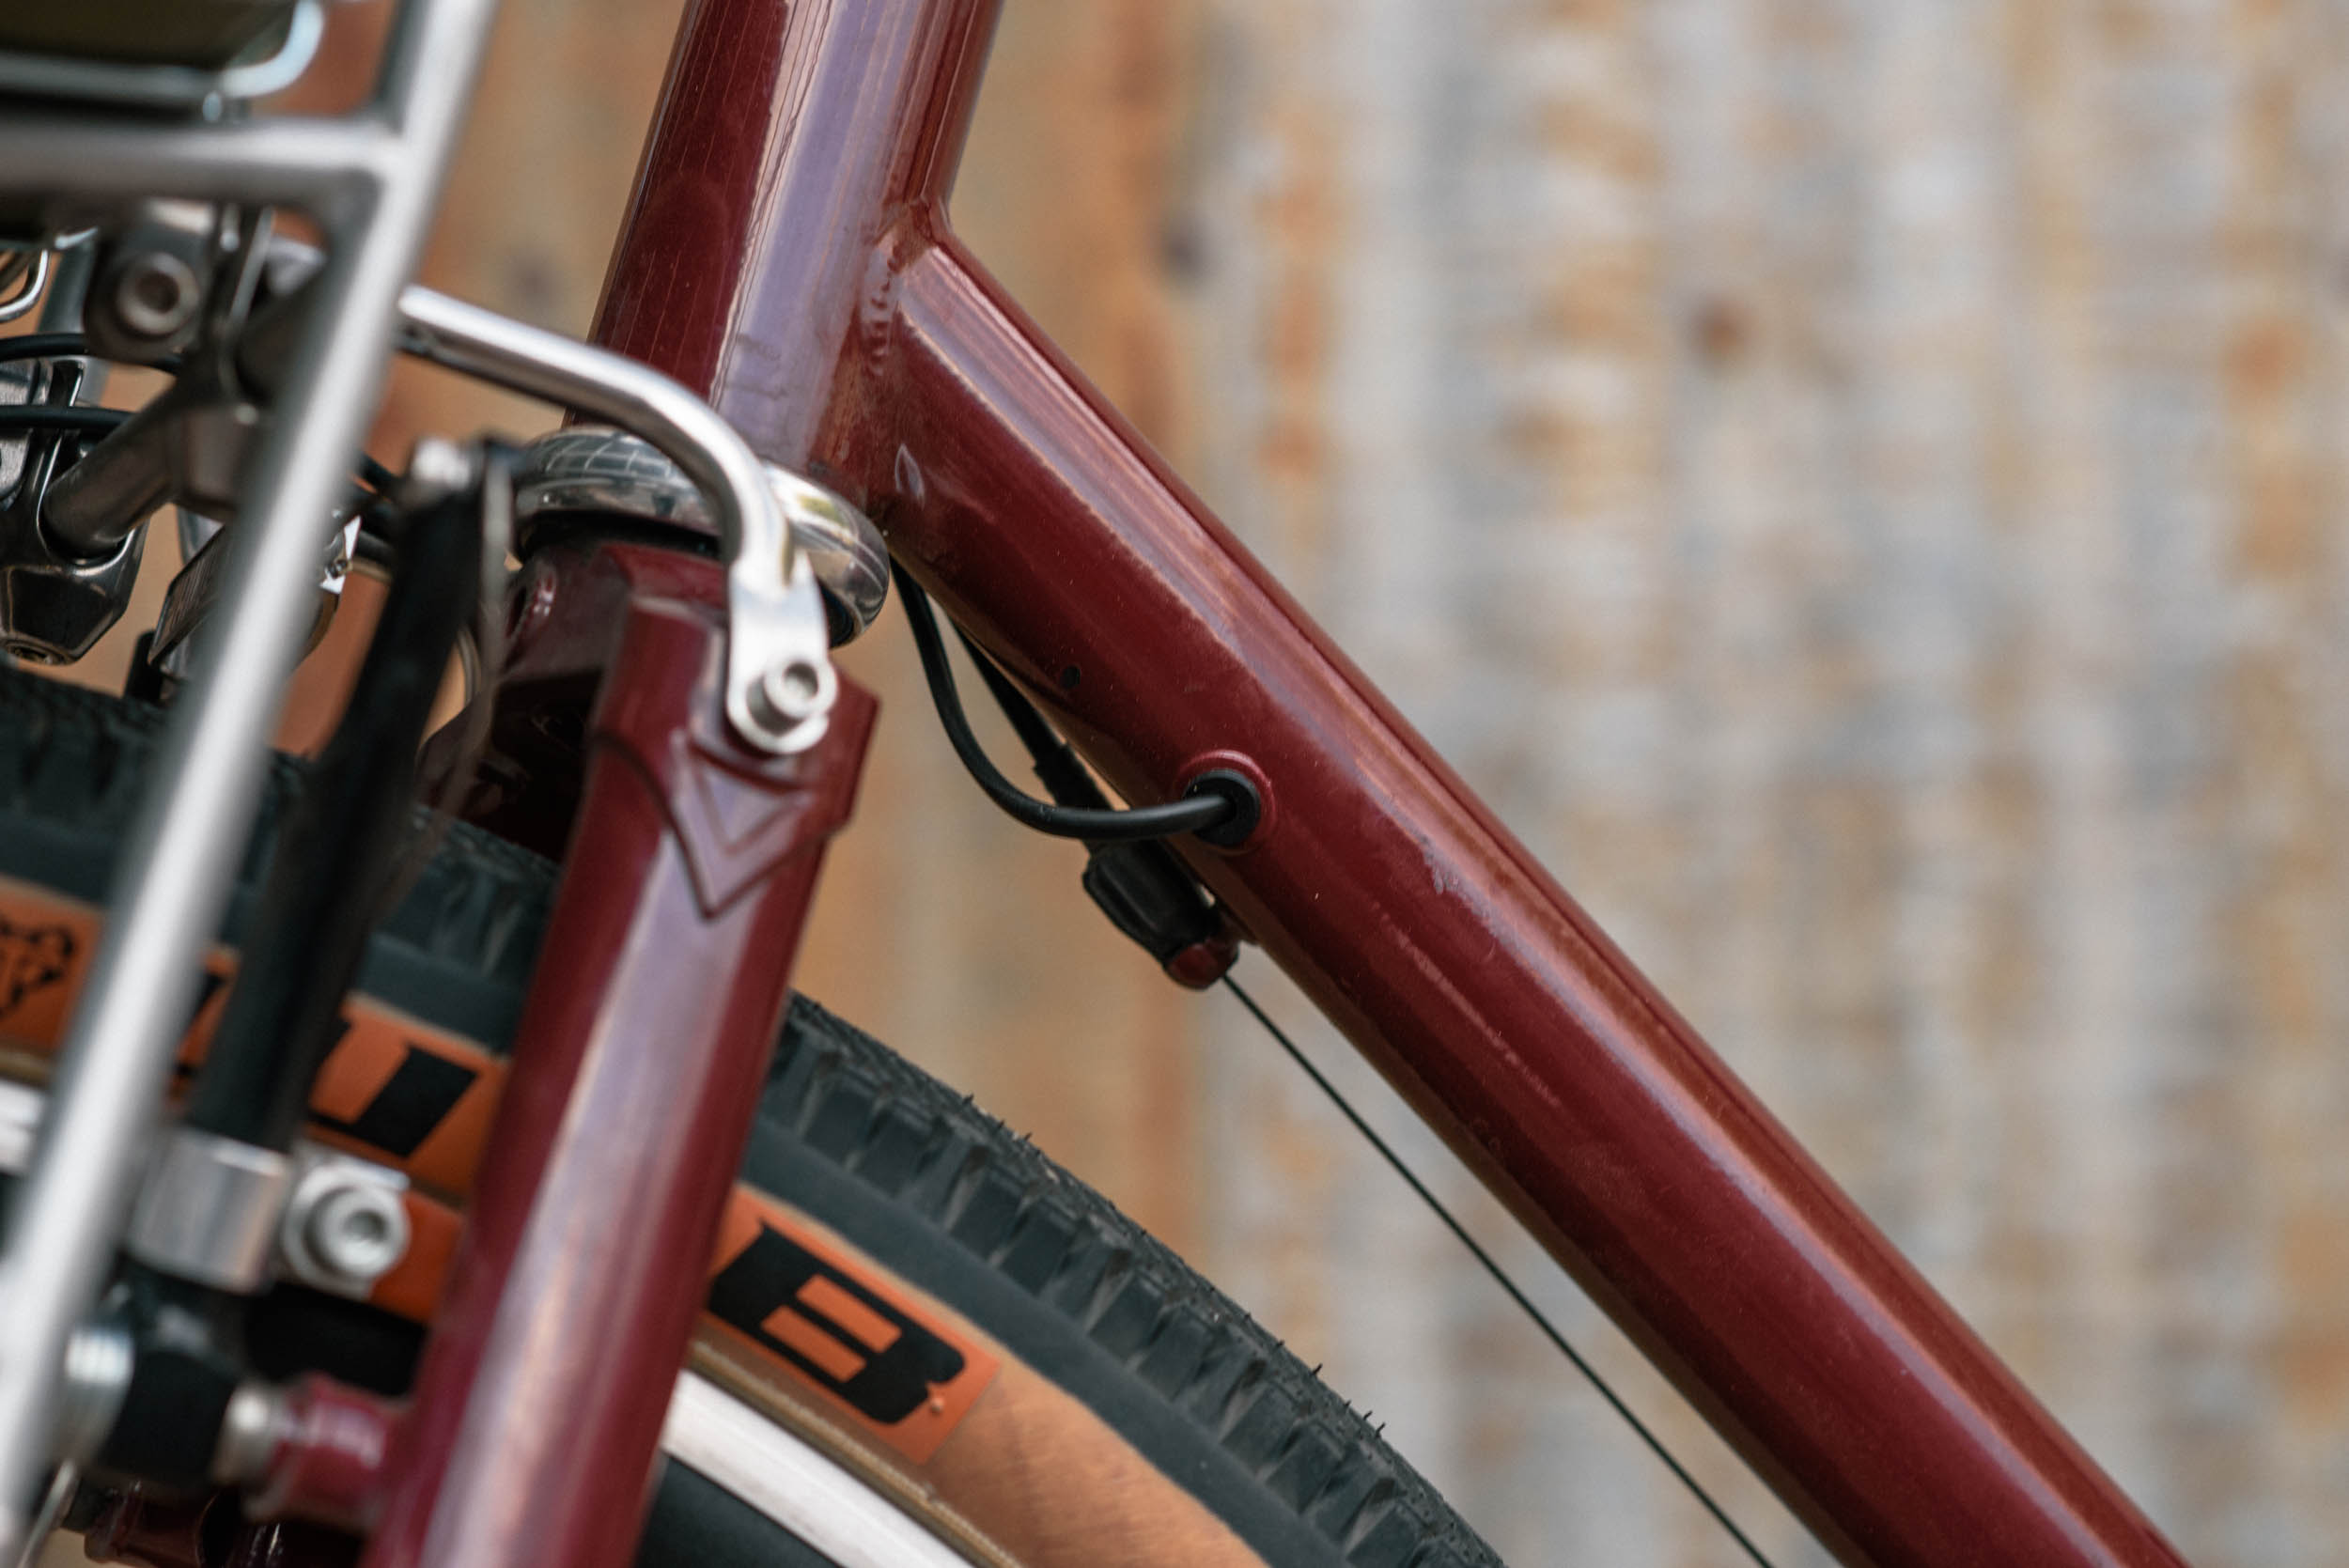 Review: Surly Cross Check — CHIEF CYCLERY